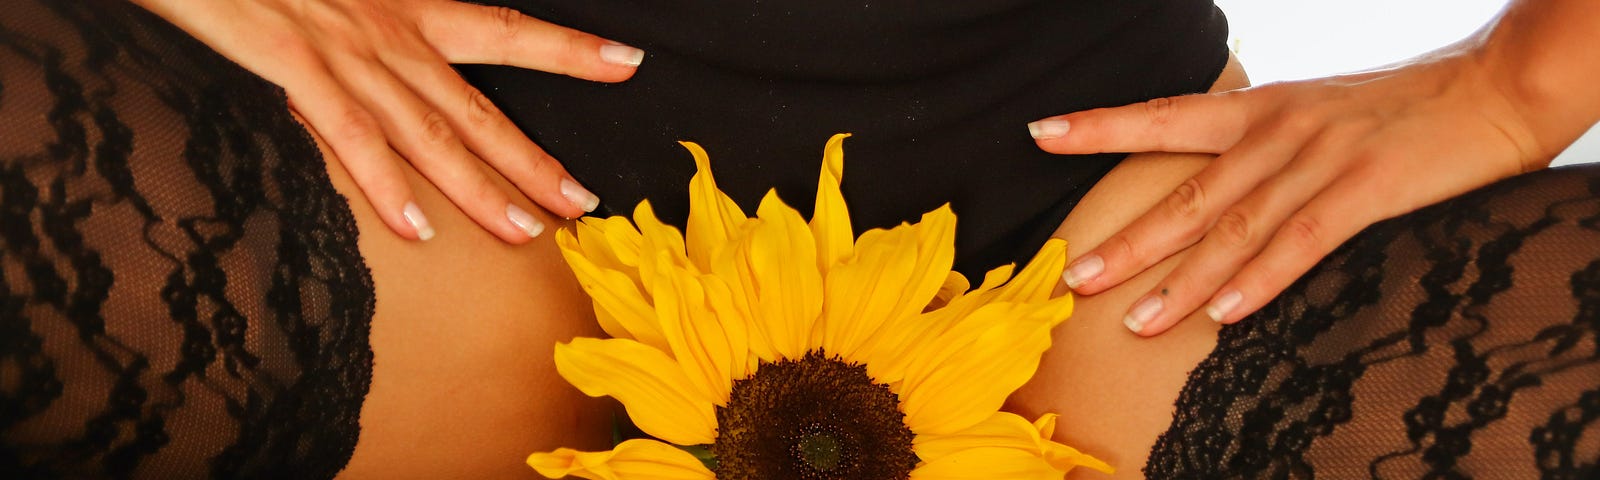 Sunflower in between the legs of a woman dressed in sexy lingerie